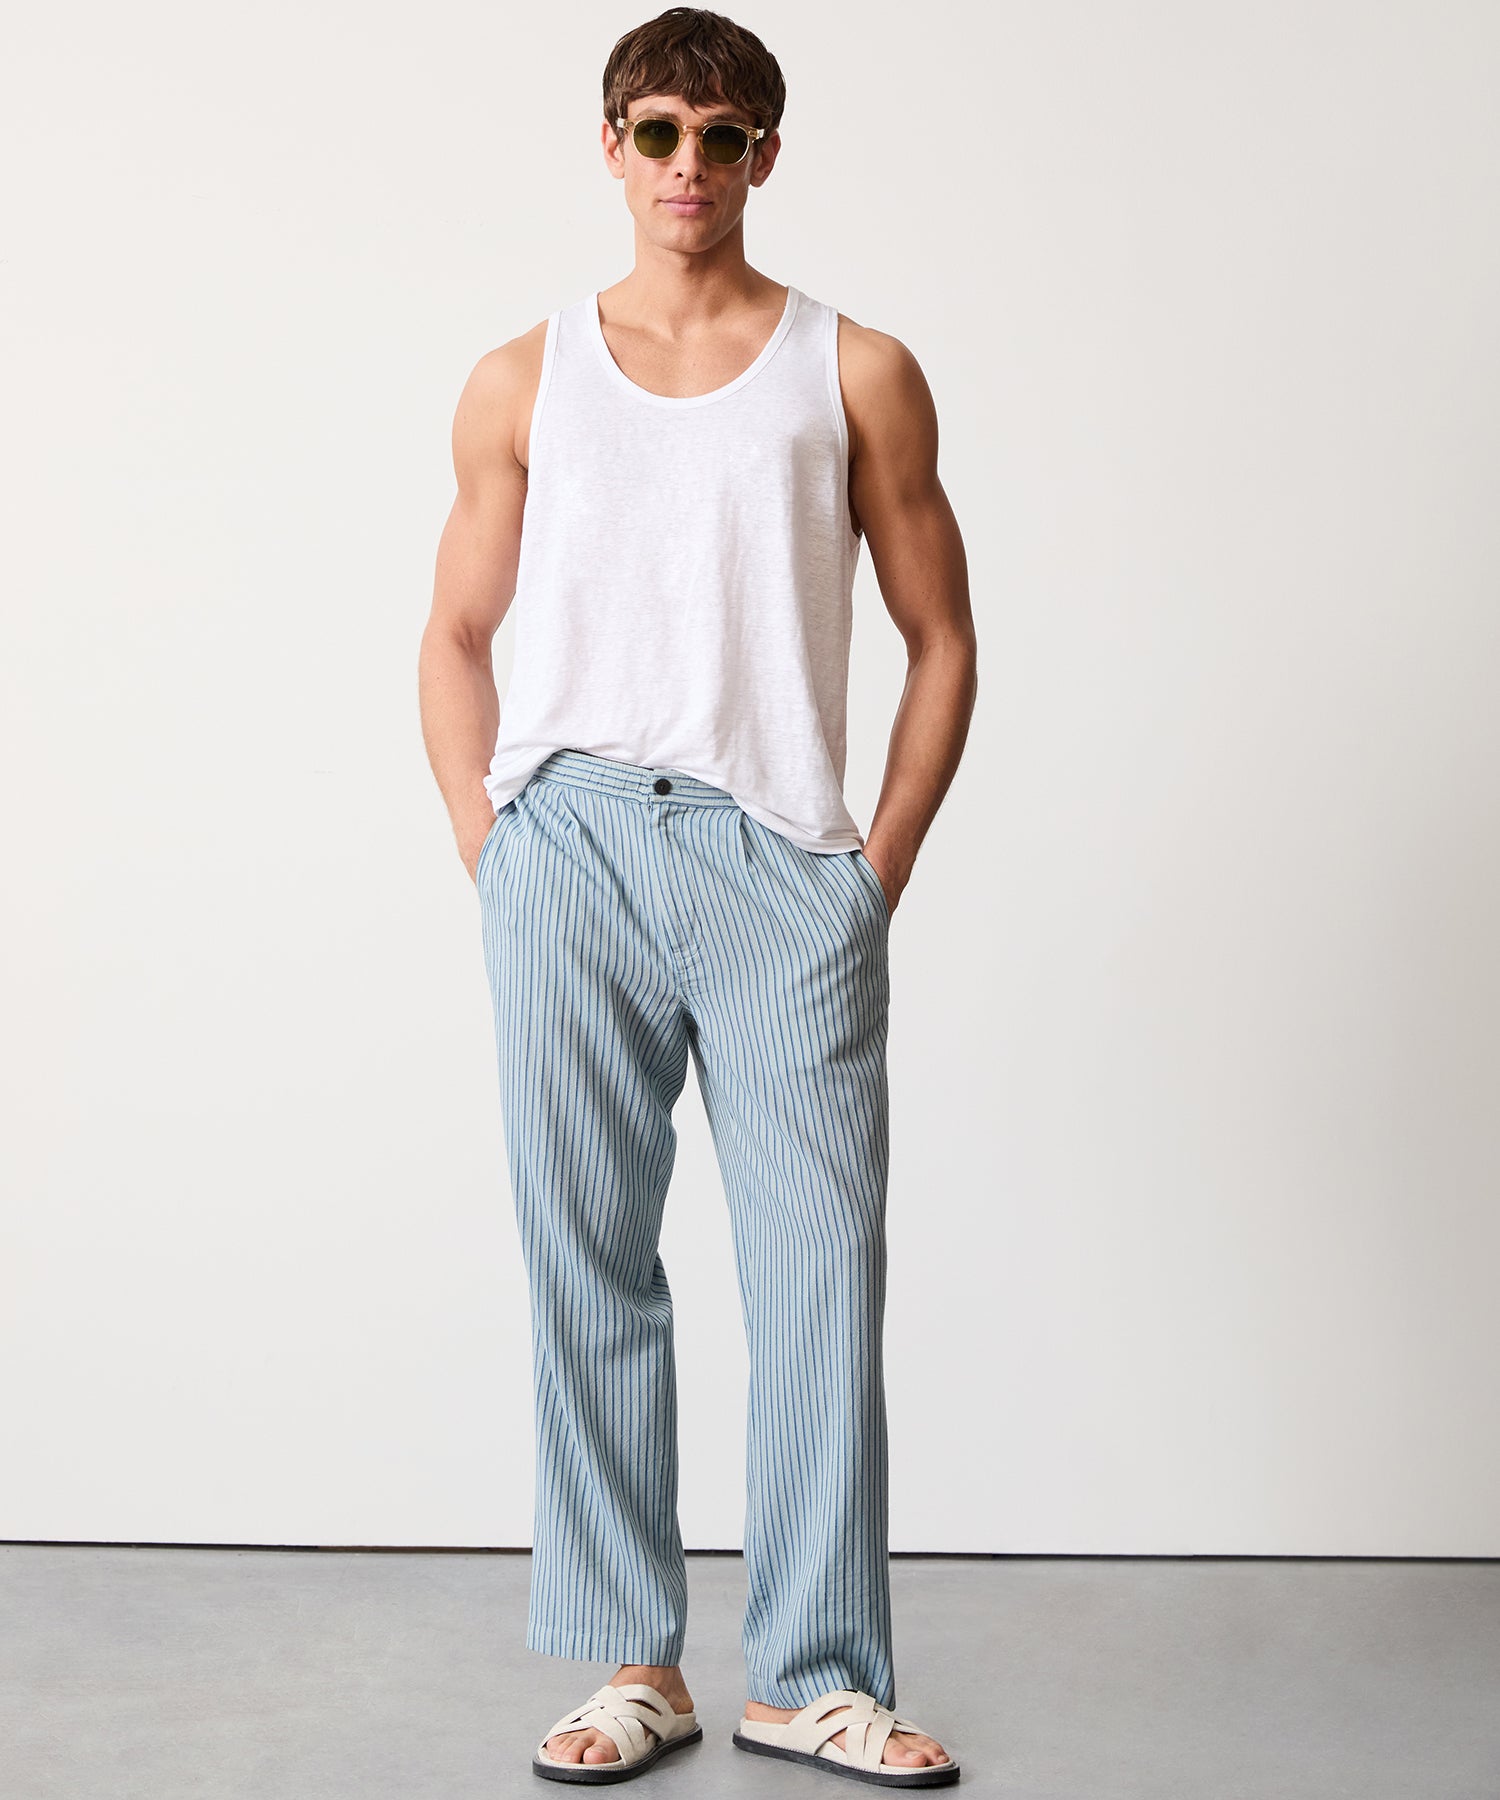 Relaxed Cotton Leisure Pant in Blue Stripe